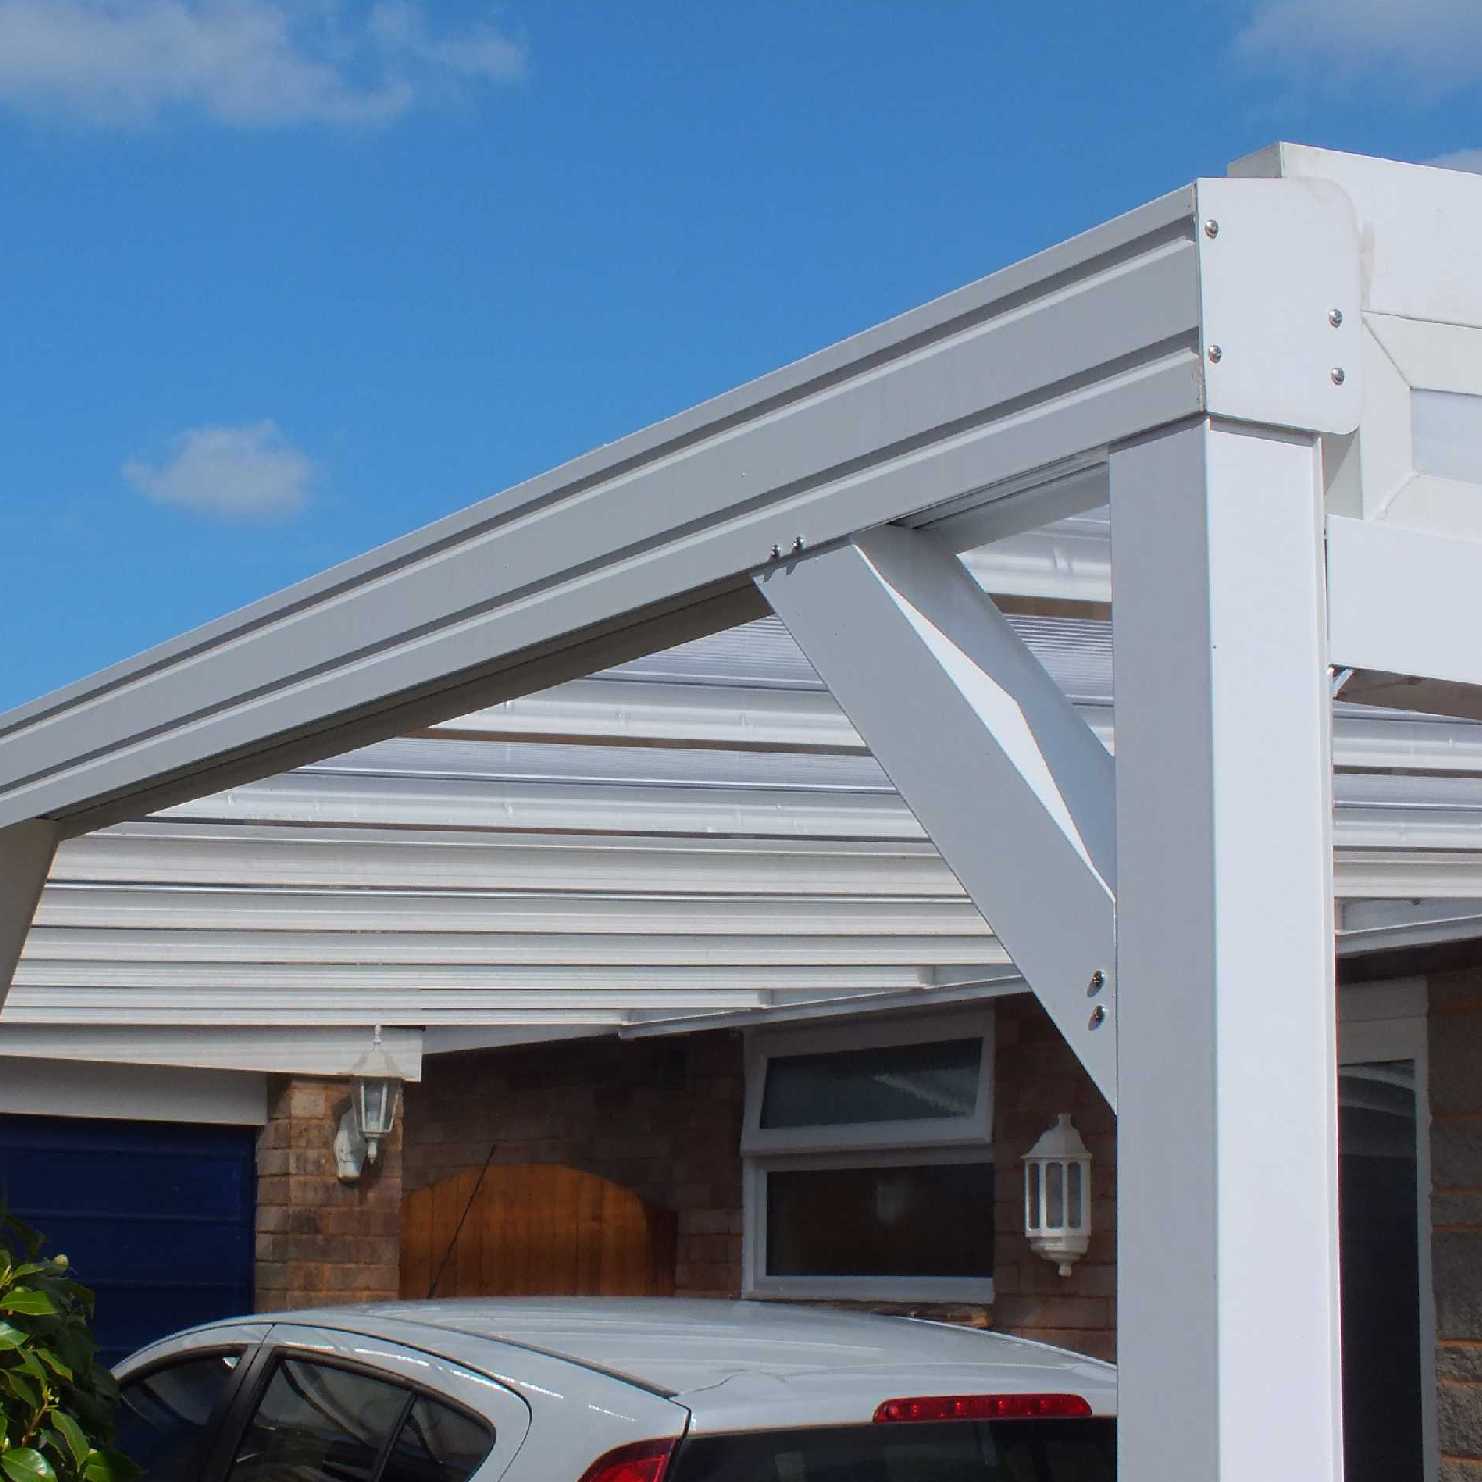 Great deals on Omega Smart Lean-To Canopy, White with 16mm Polycarbonate Glazing - 10.2m (W) x 4.5m (P), (5) Supporting Posts